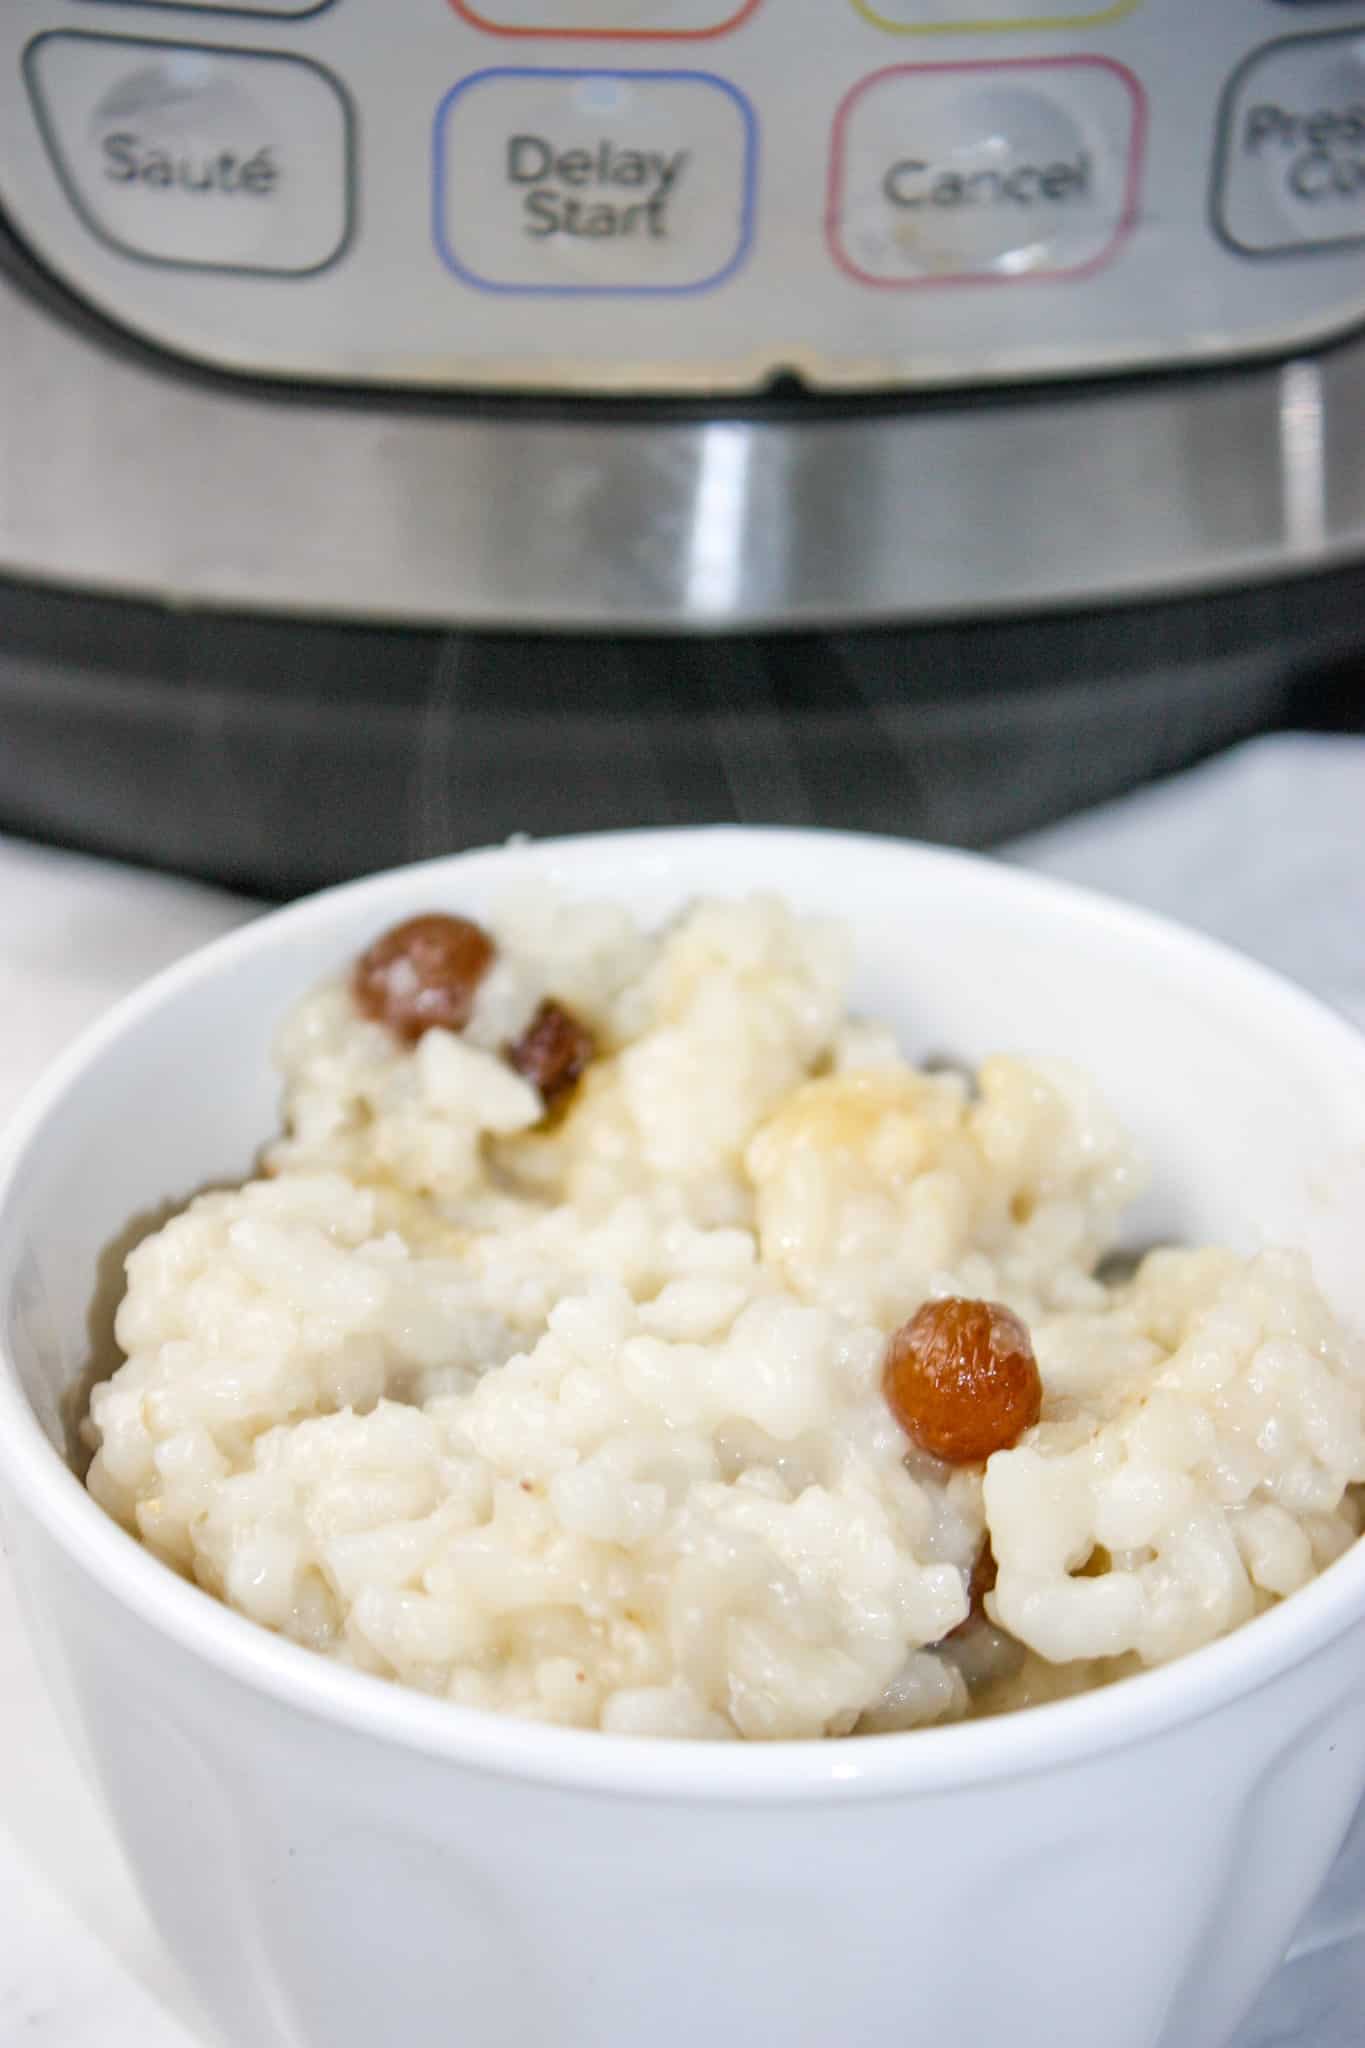 Arborio Rice Pudding is the perfect dessert any day of the week.  Dress it up to suit your tastes and this dairy free version of rice pudding will satisfy any sweet cravings.